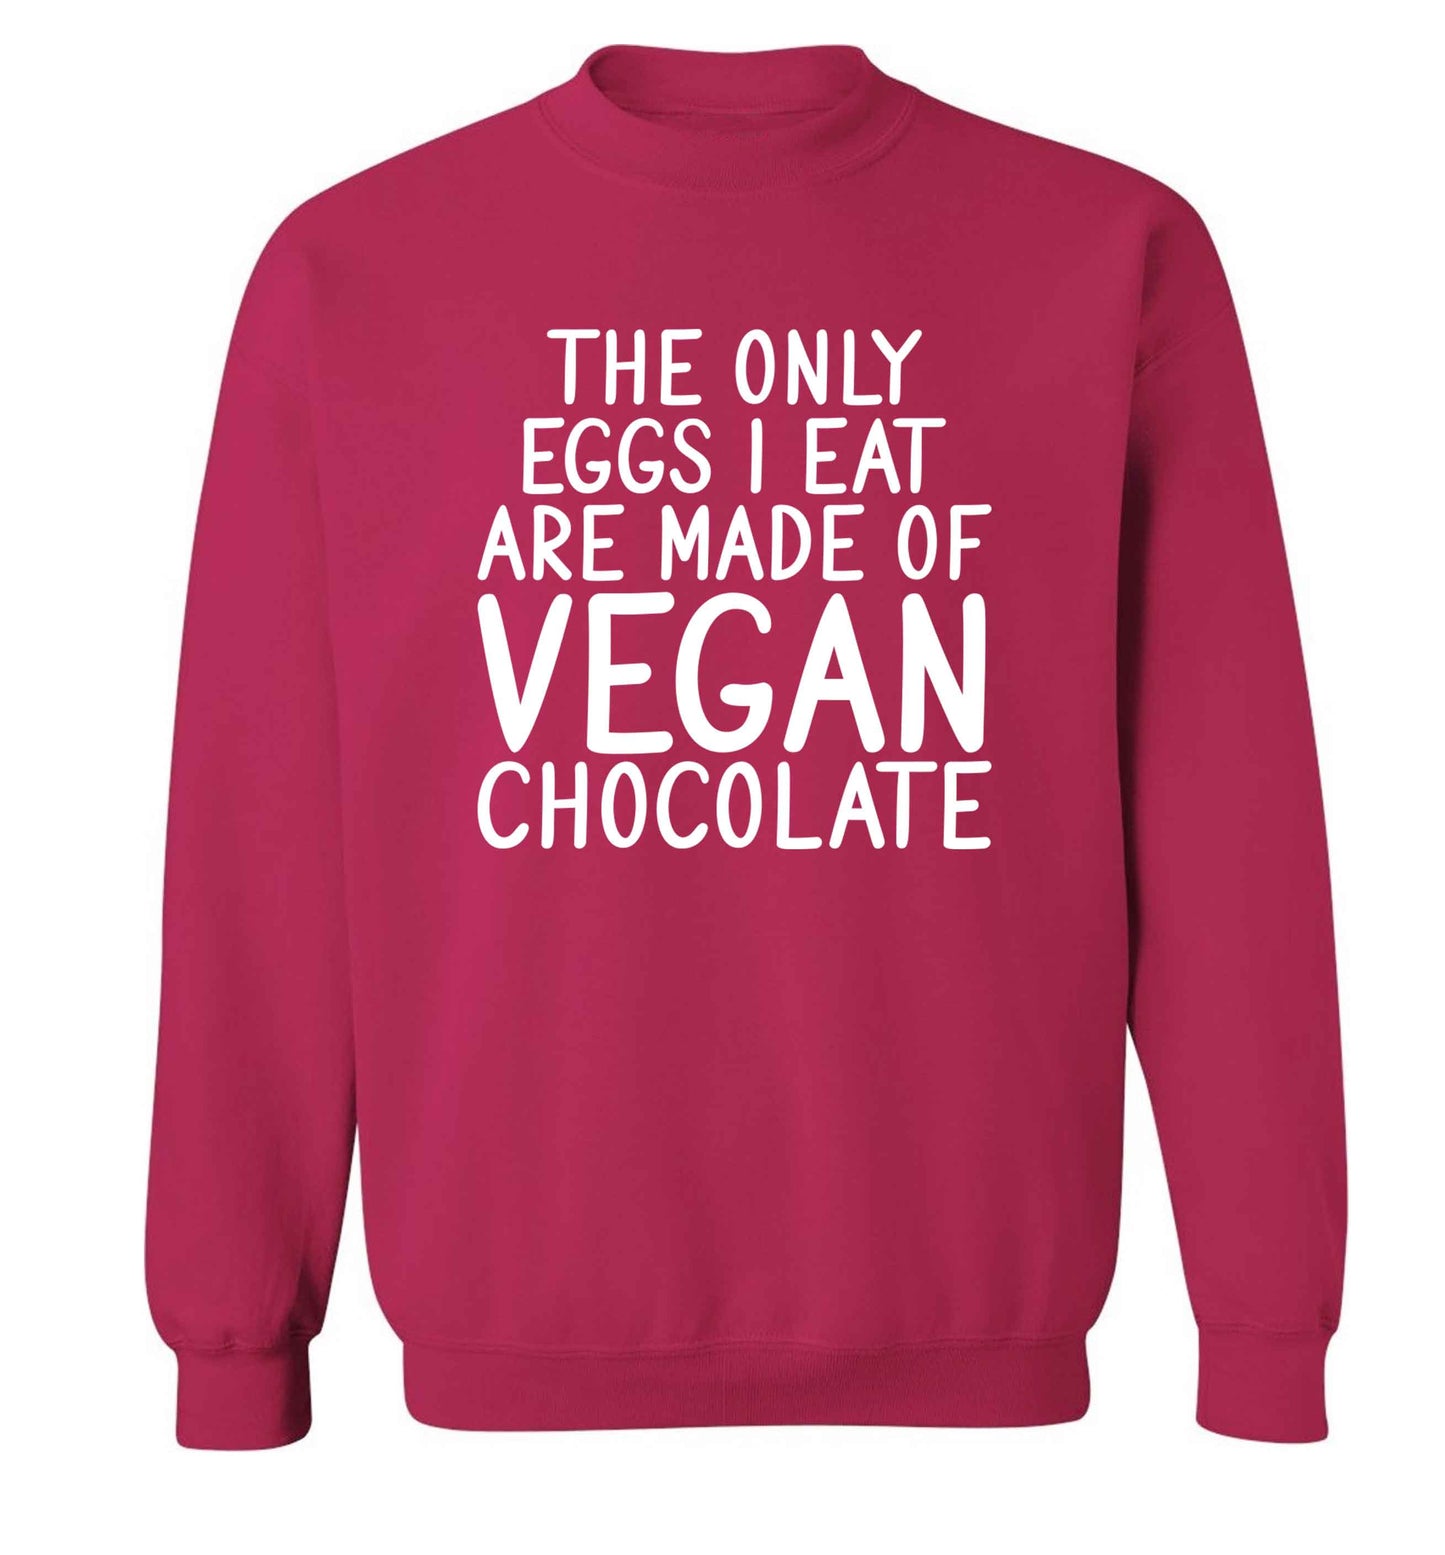 The only eggs I eat are made of vegan chocolate adult's unisex pink sweater 2XL